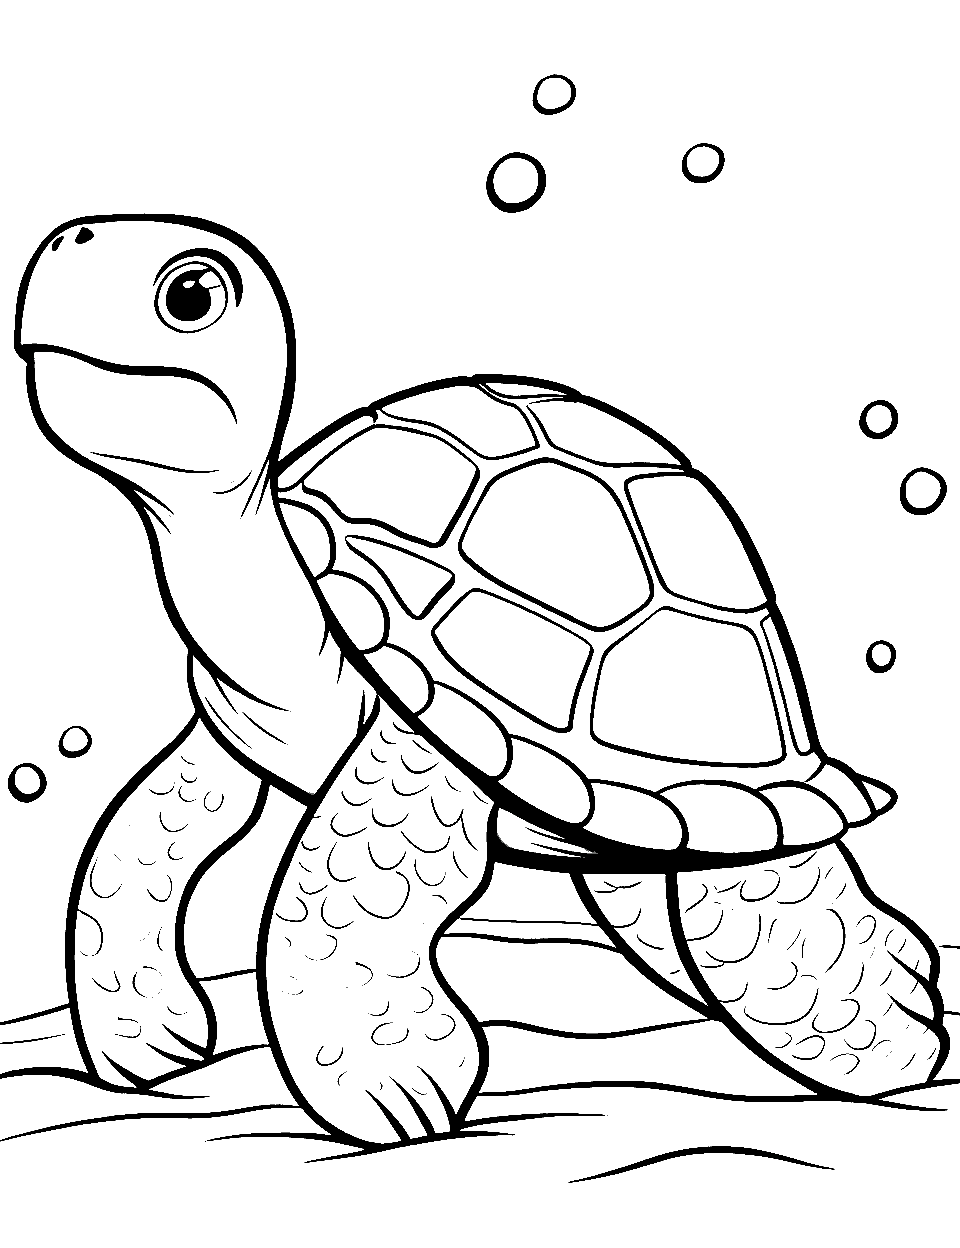 Toddlers' Favorite Turtle Coloring Page - A basic, large turtle outline designed for toddlers to color in.